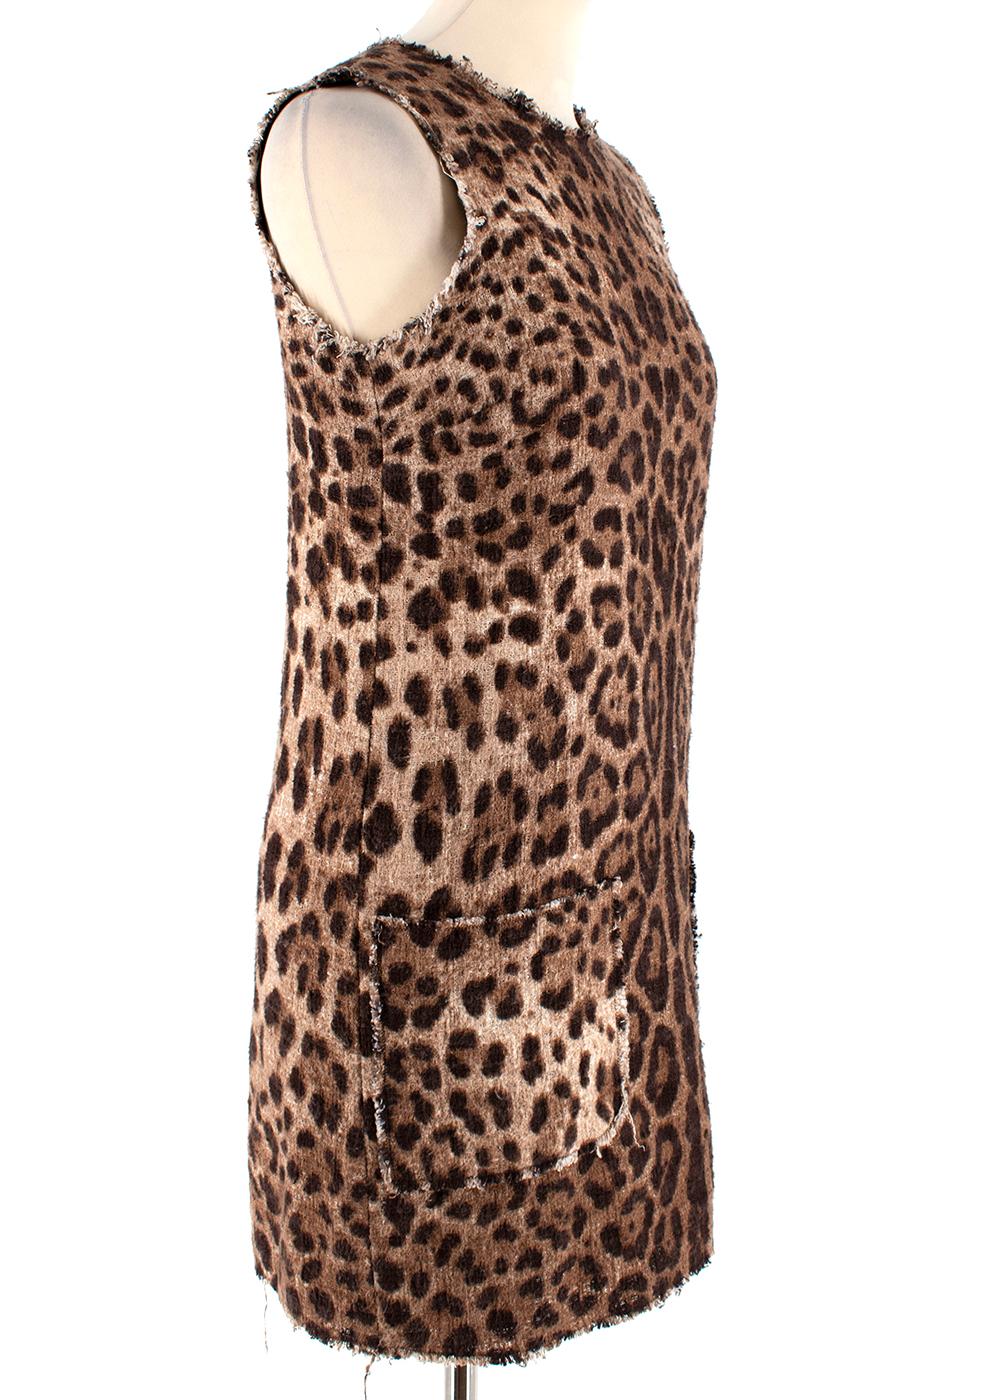 Dolce & Gabbana Leopard Print Dress

- Black silk lining
- Size 36 IT
- Sleeveless 
- Dolce signature leopard print
- Raw edged neckline, sleeves and skirt bottom
- Back zip with silver hardware
- Textured dress with woven material 
- Patched